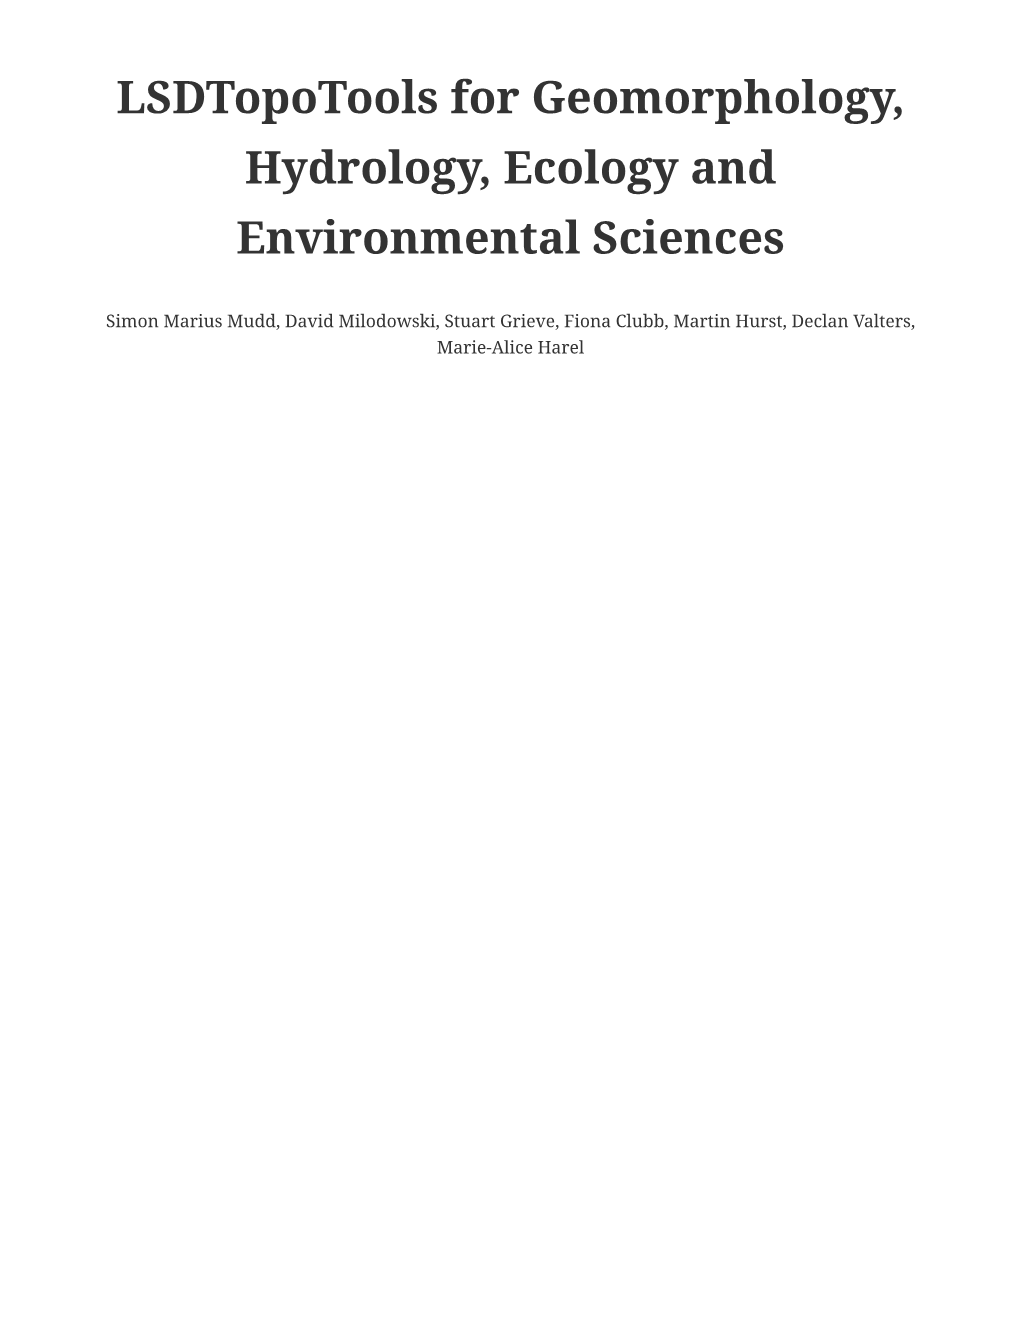 Lsdtopotools for Geomorphology, Hydrology, Ecology and Environmental Sciences